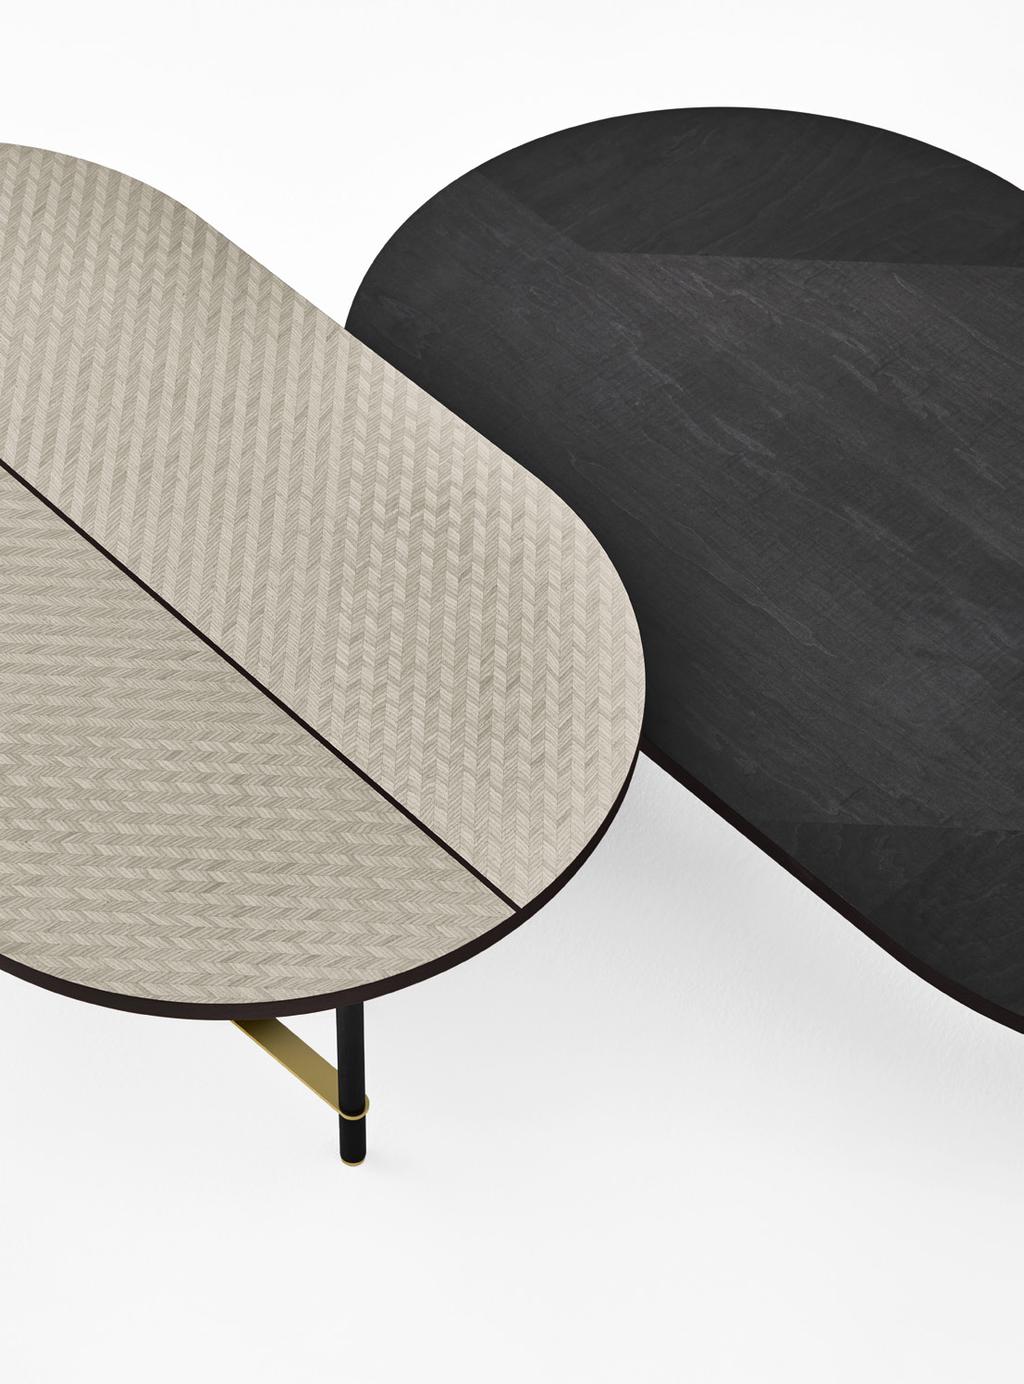 Coffee table with inlaid wooden top with Tweed pattern, in Taba Frisé white wood and Tanganika black wood or in Maple Frisé dark grey.